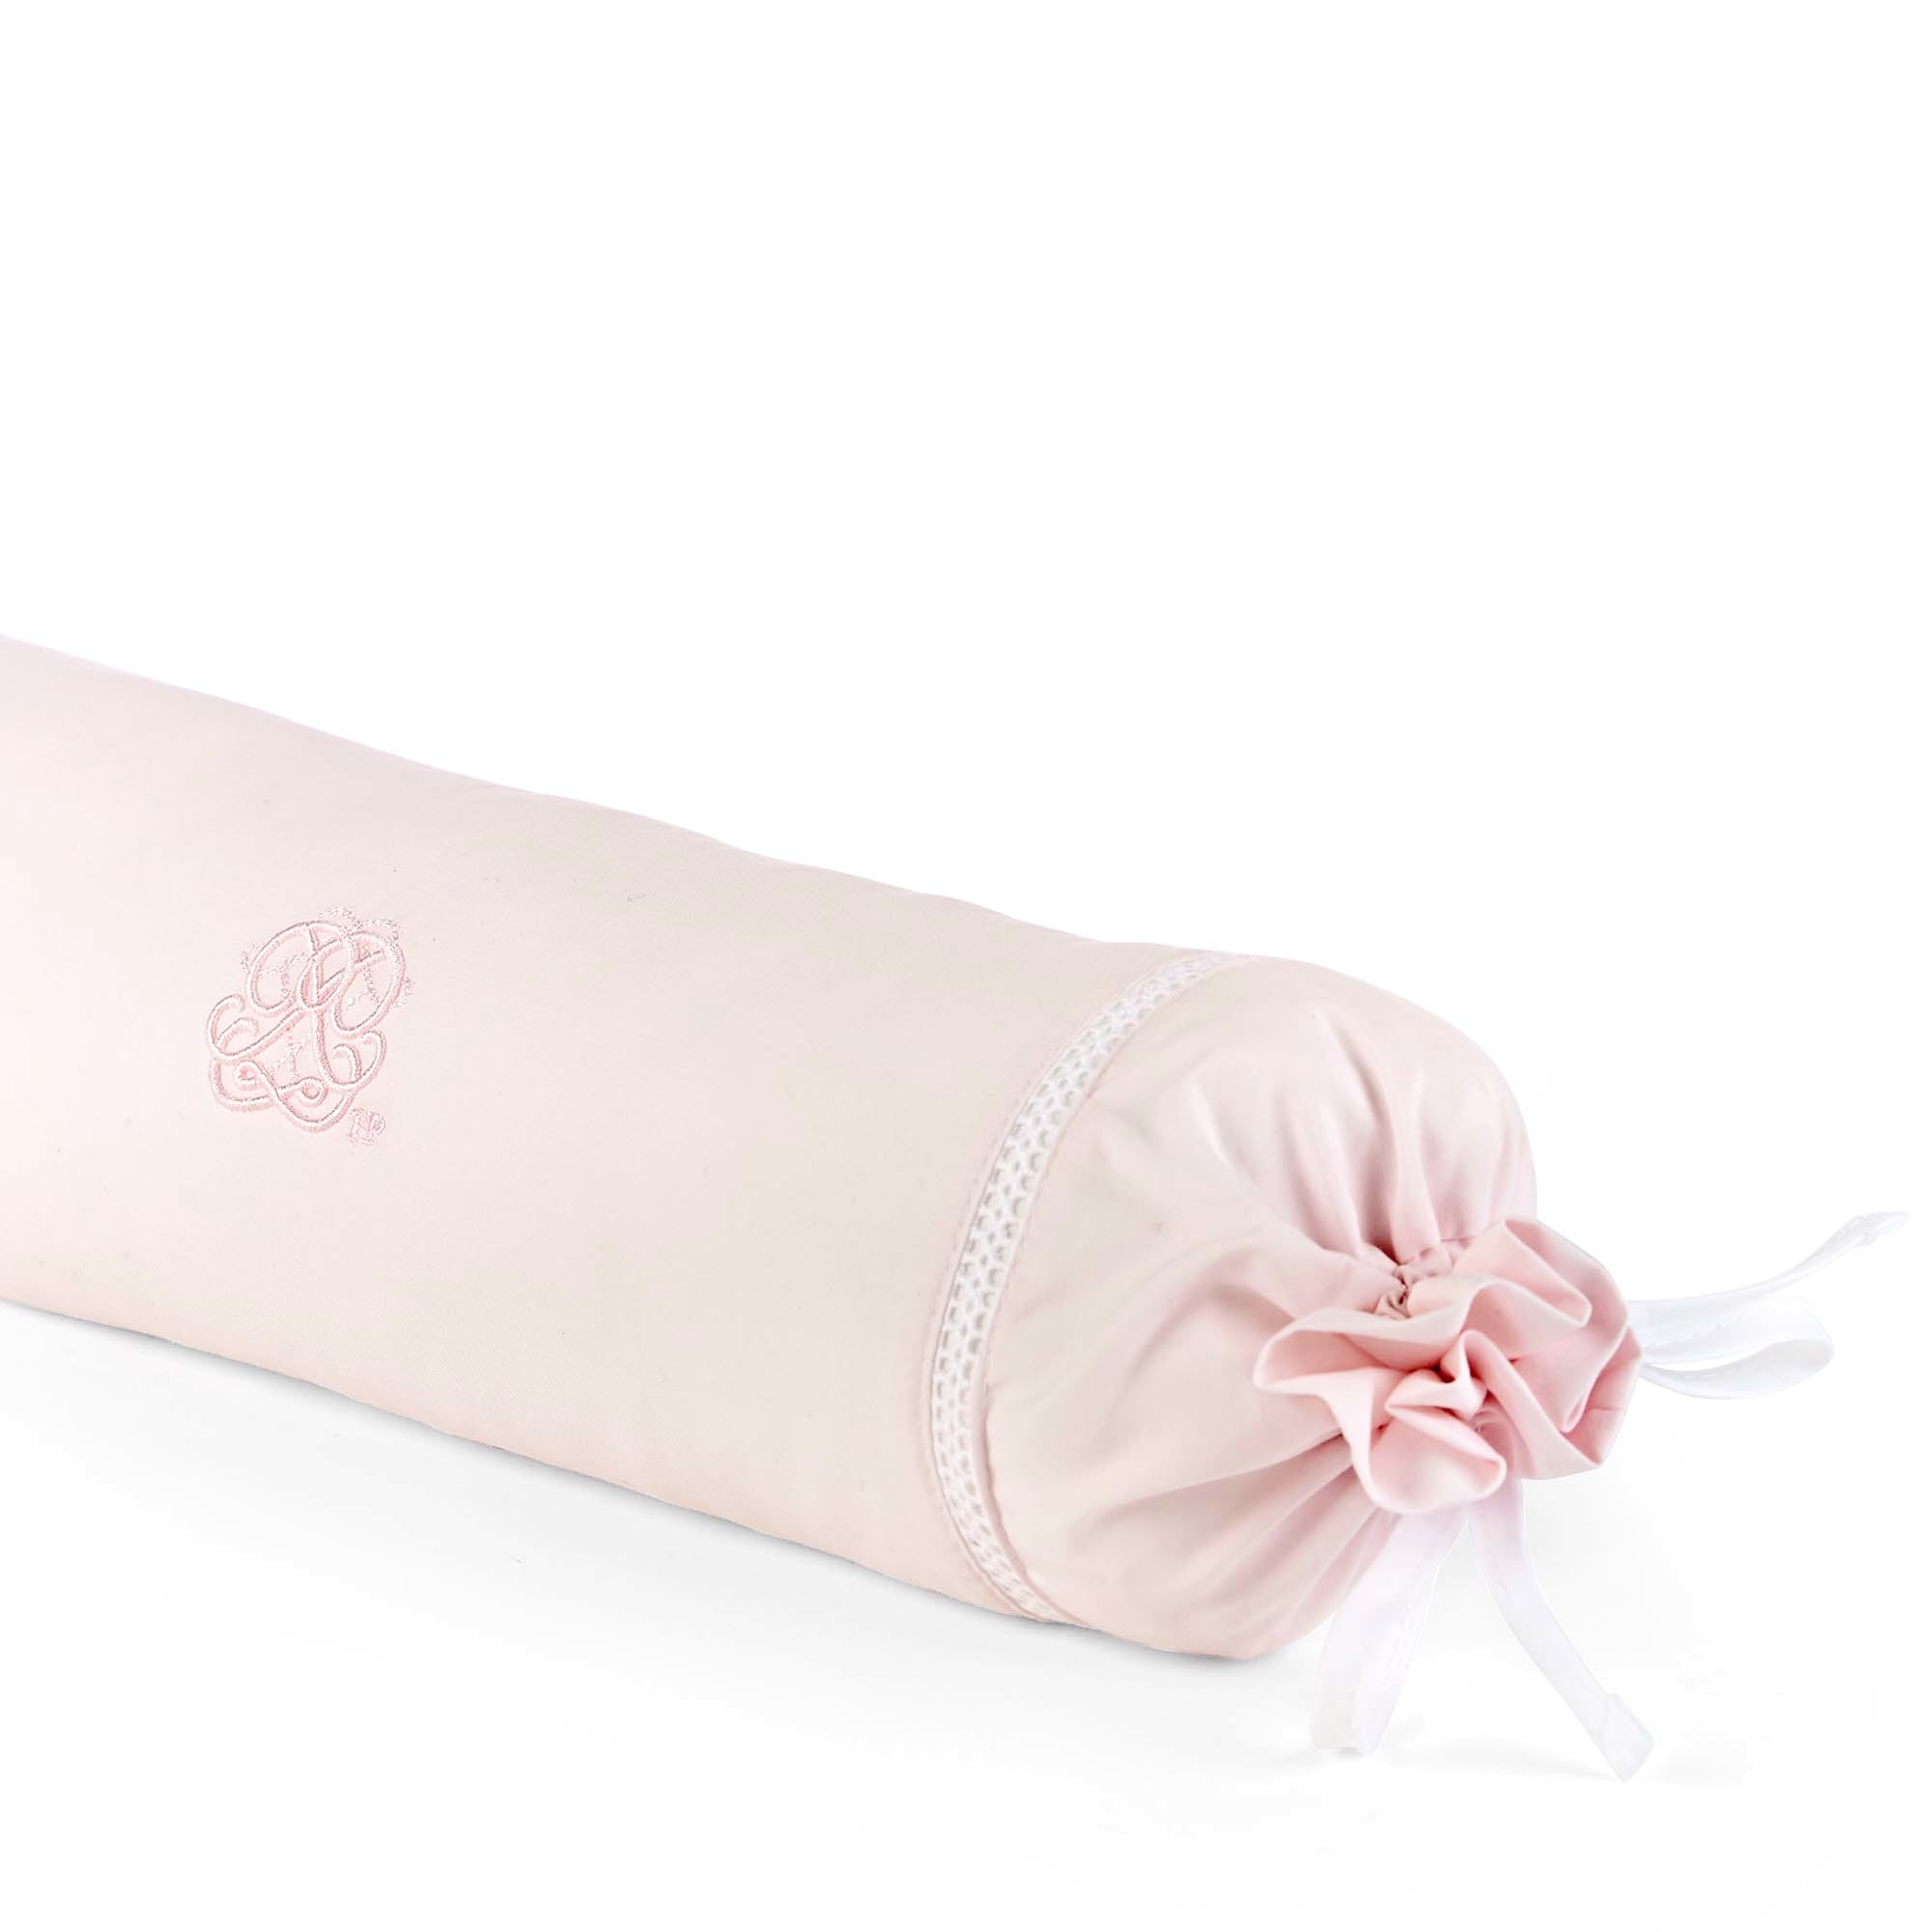 Theophile & Patachou Baby Roll Cushion - Cotton Pink